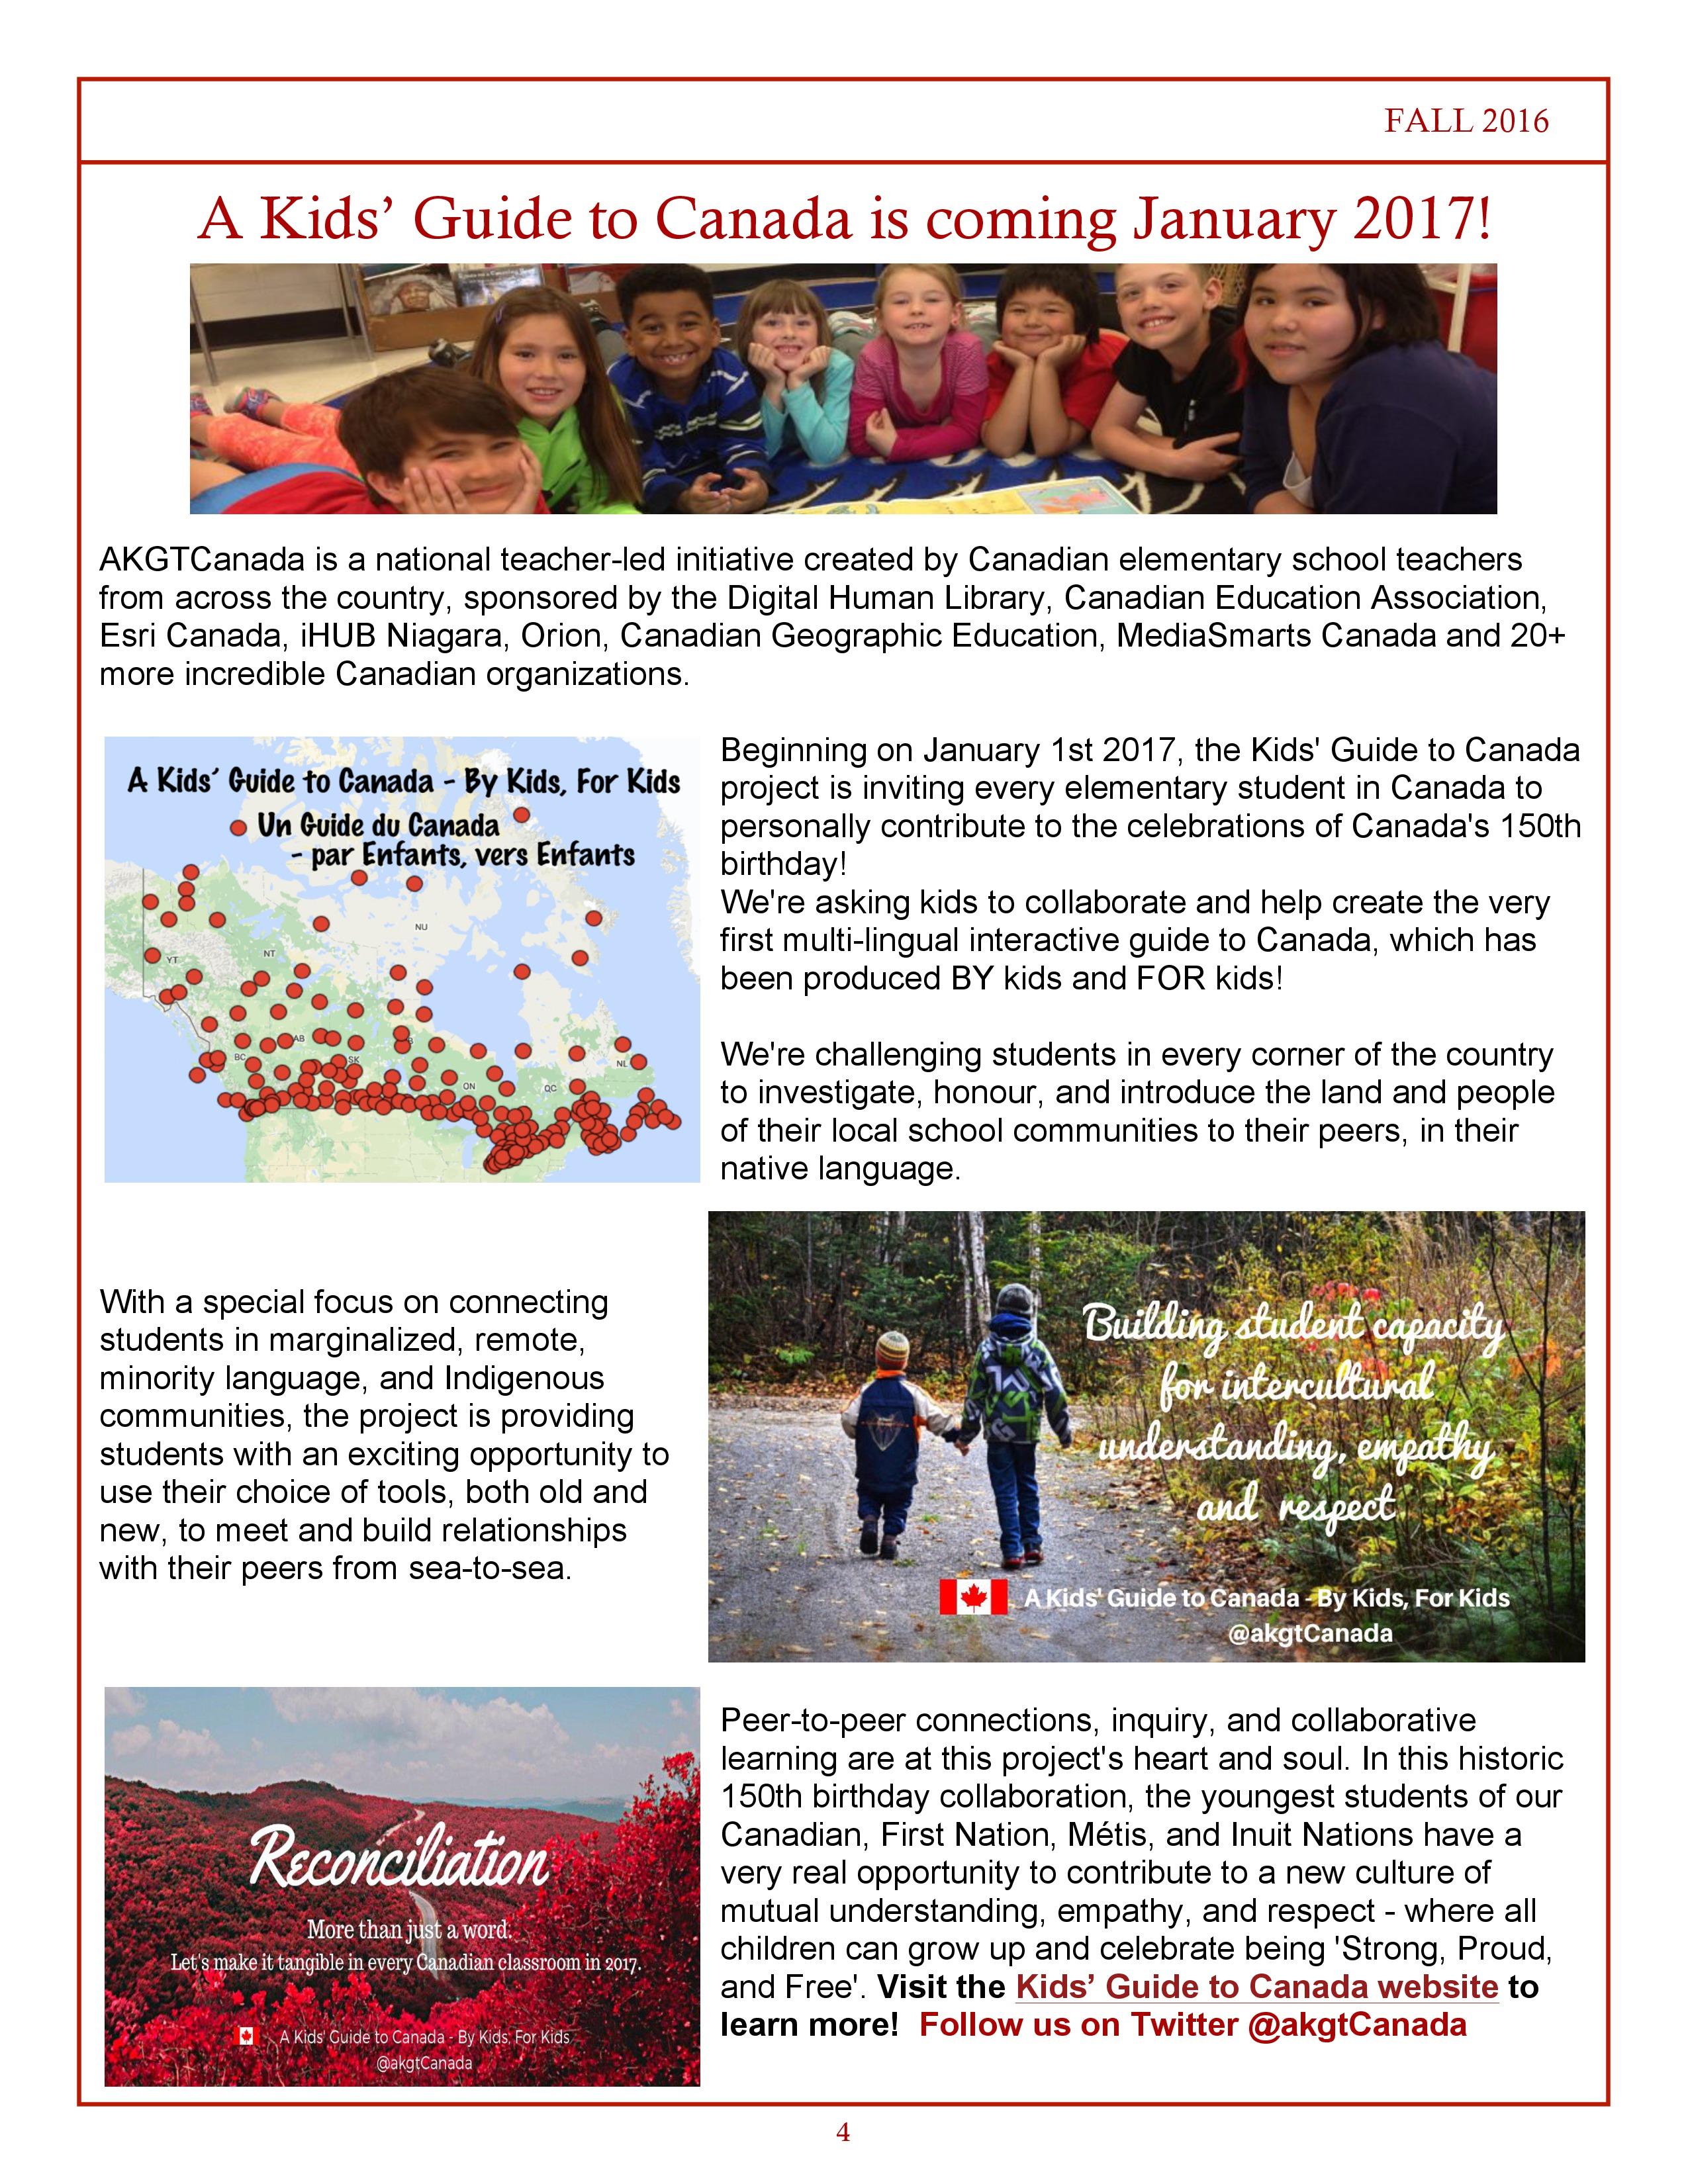 digital-human-library-september-newsletter_fall_2016-page-3-1